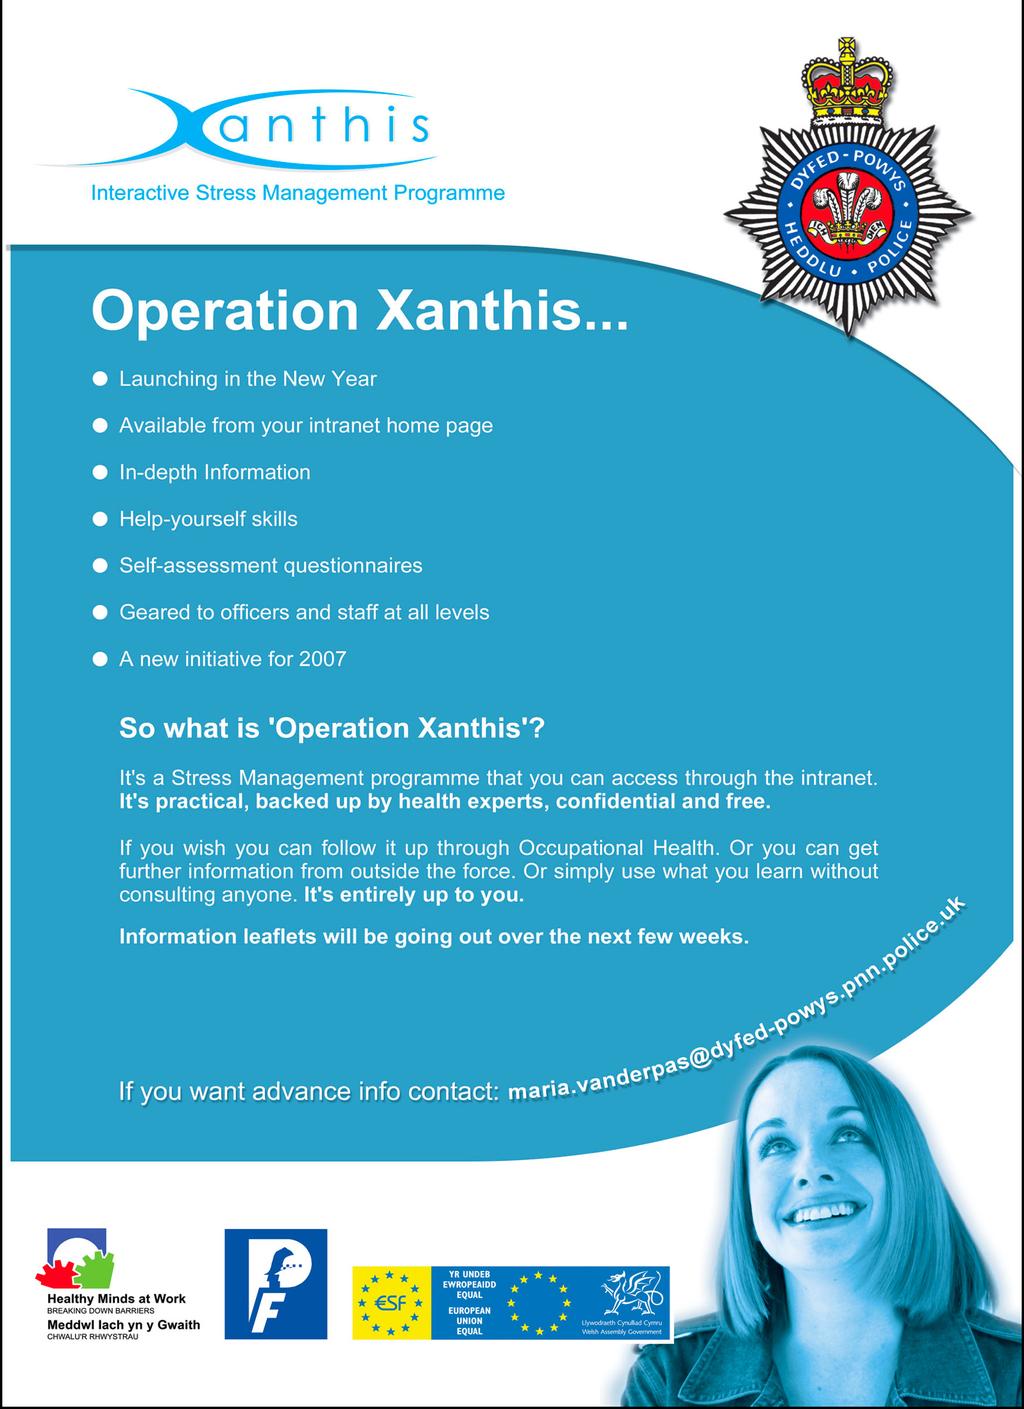 Dyfed Powys Police Force User Before After Questionnaire conducted on 27 call centre operators good user feedback Xanthis has given me confidence in what I am doing Xanthis has made me ask questions